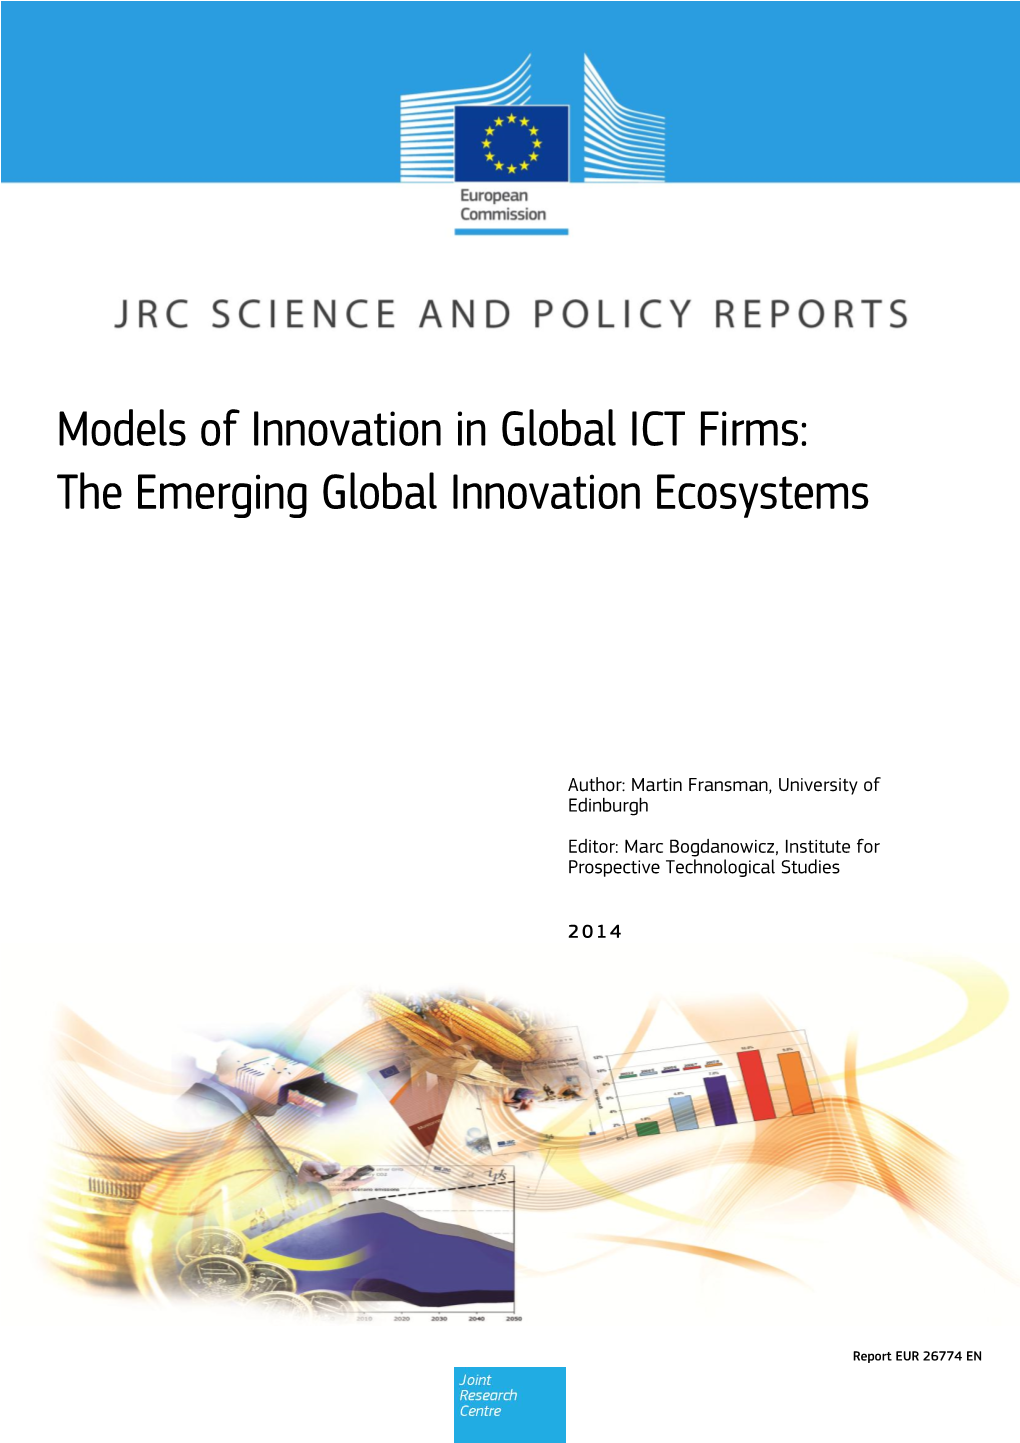 The Emerging Global Innovation Ecosystems